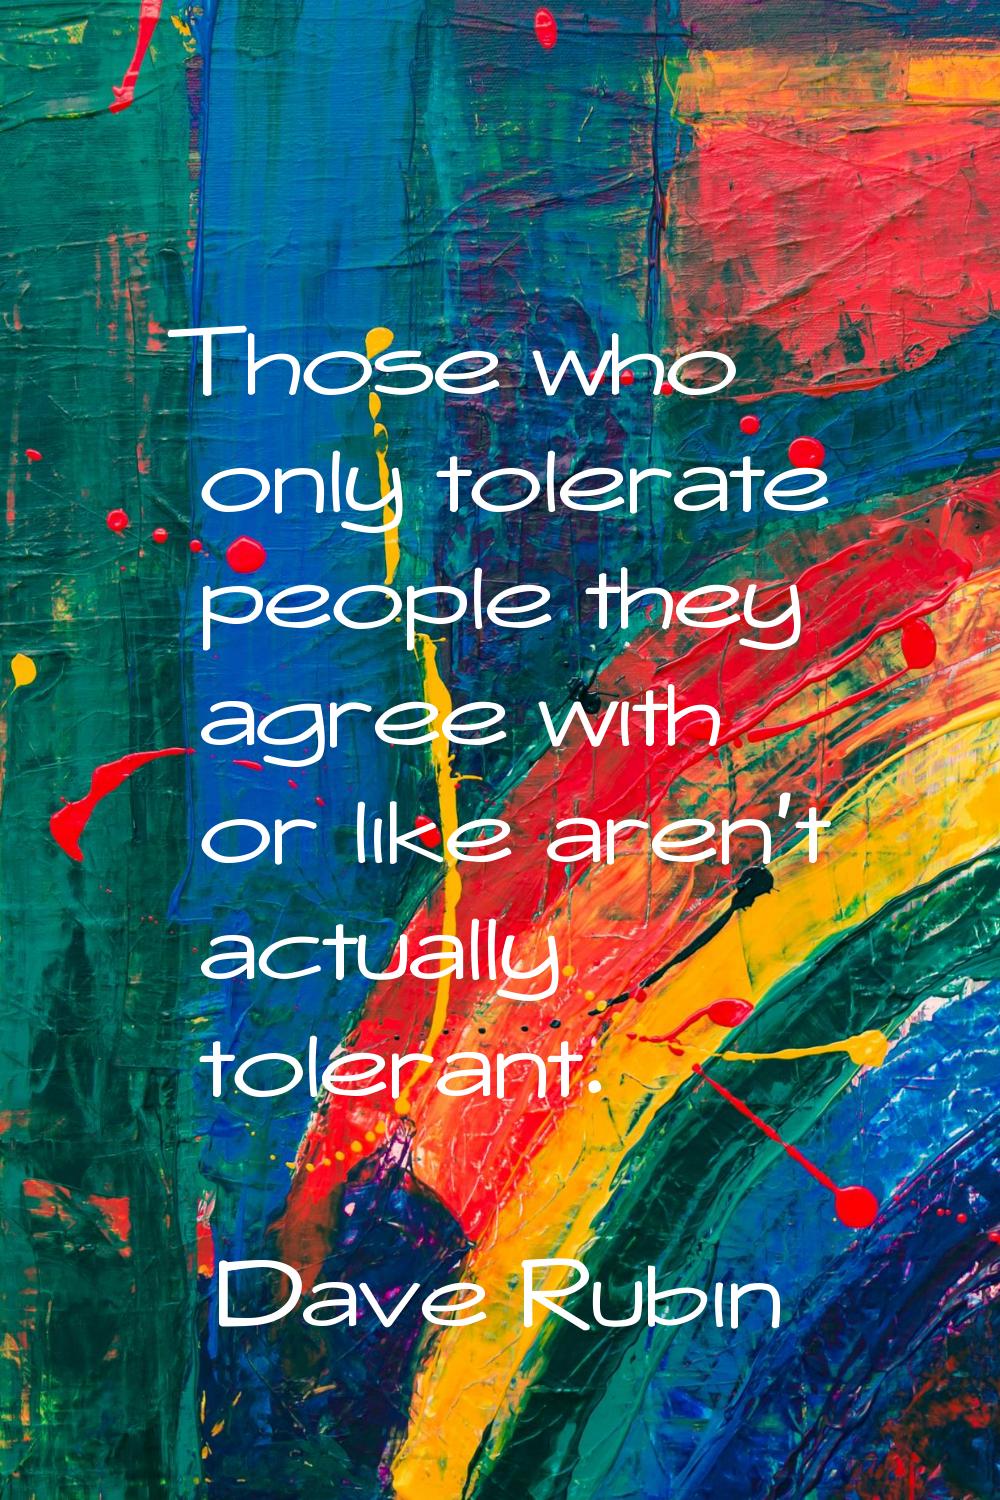 Those who only tolerate people they agree with or like aren't actually tolerant.